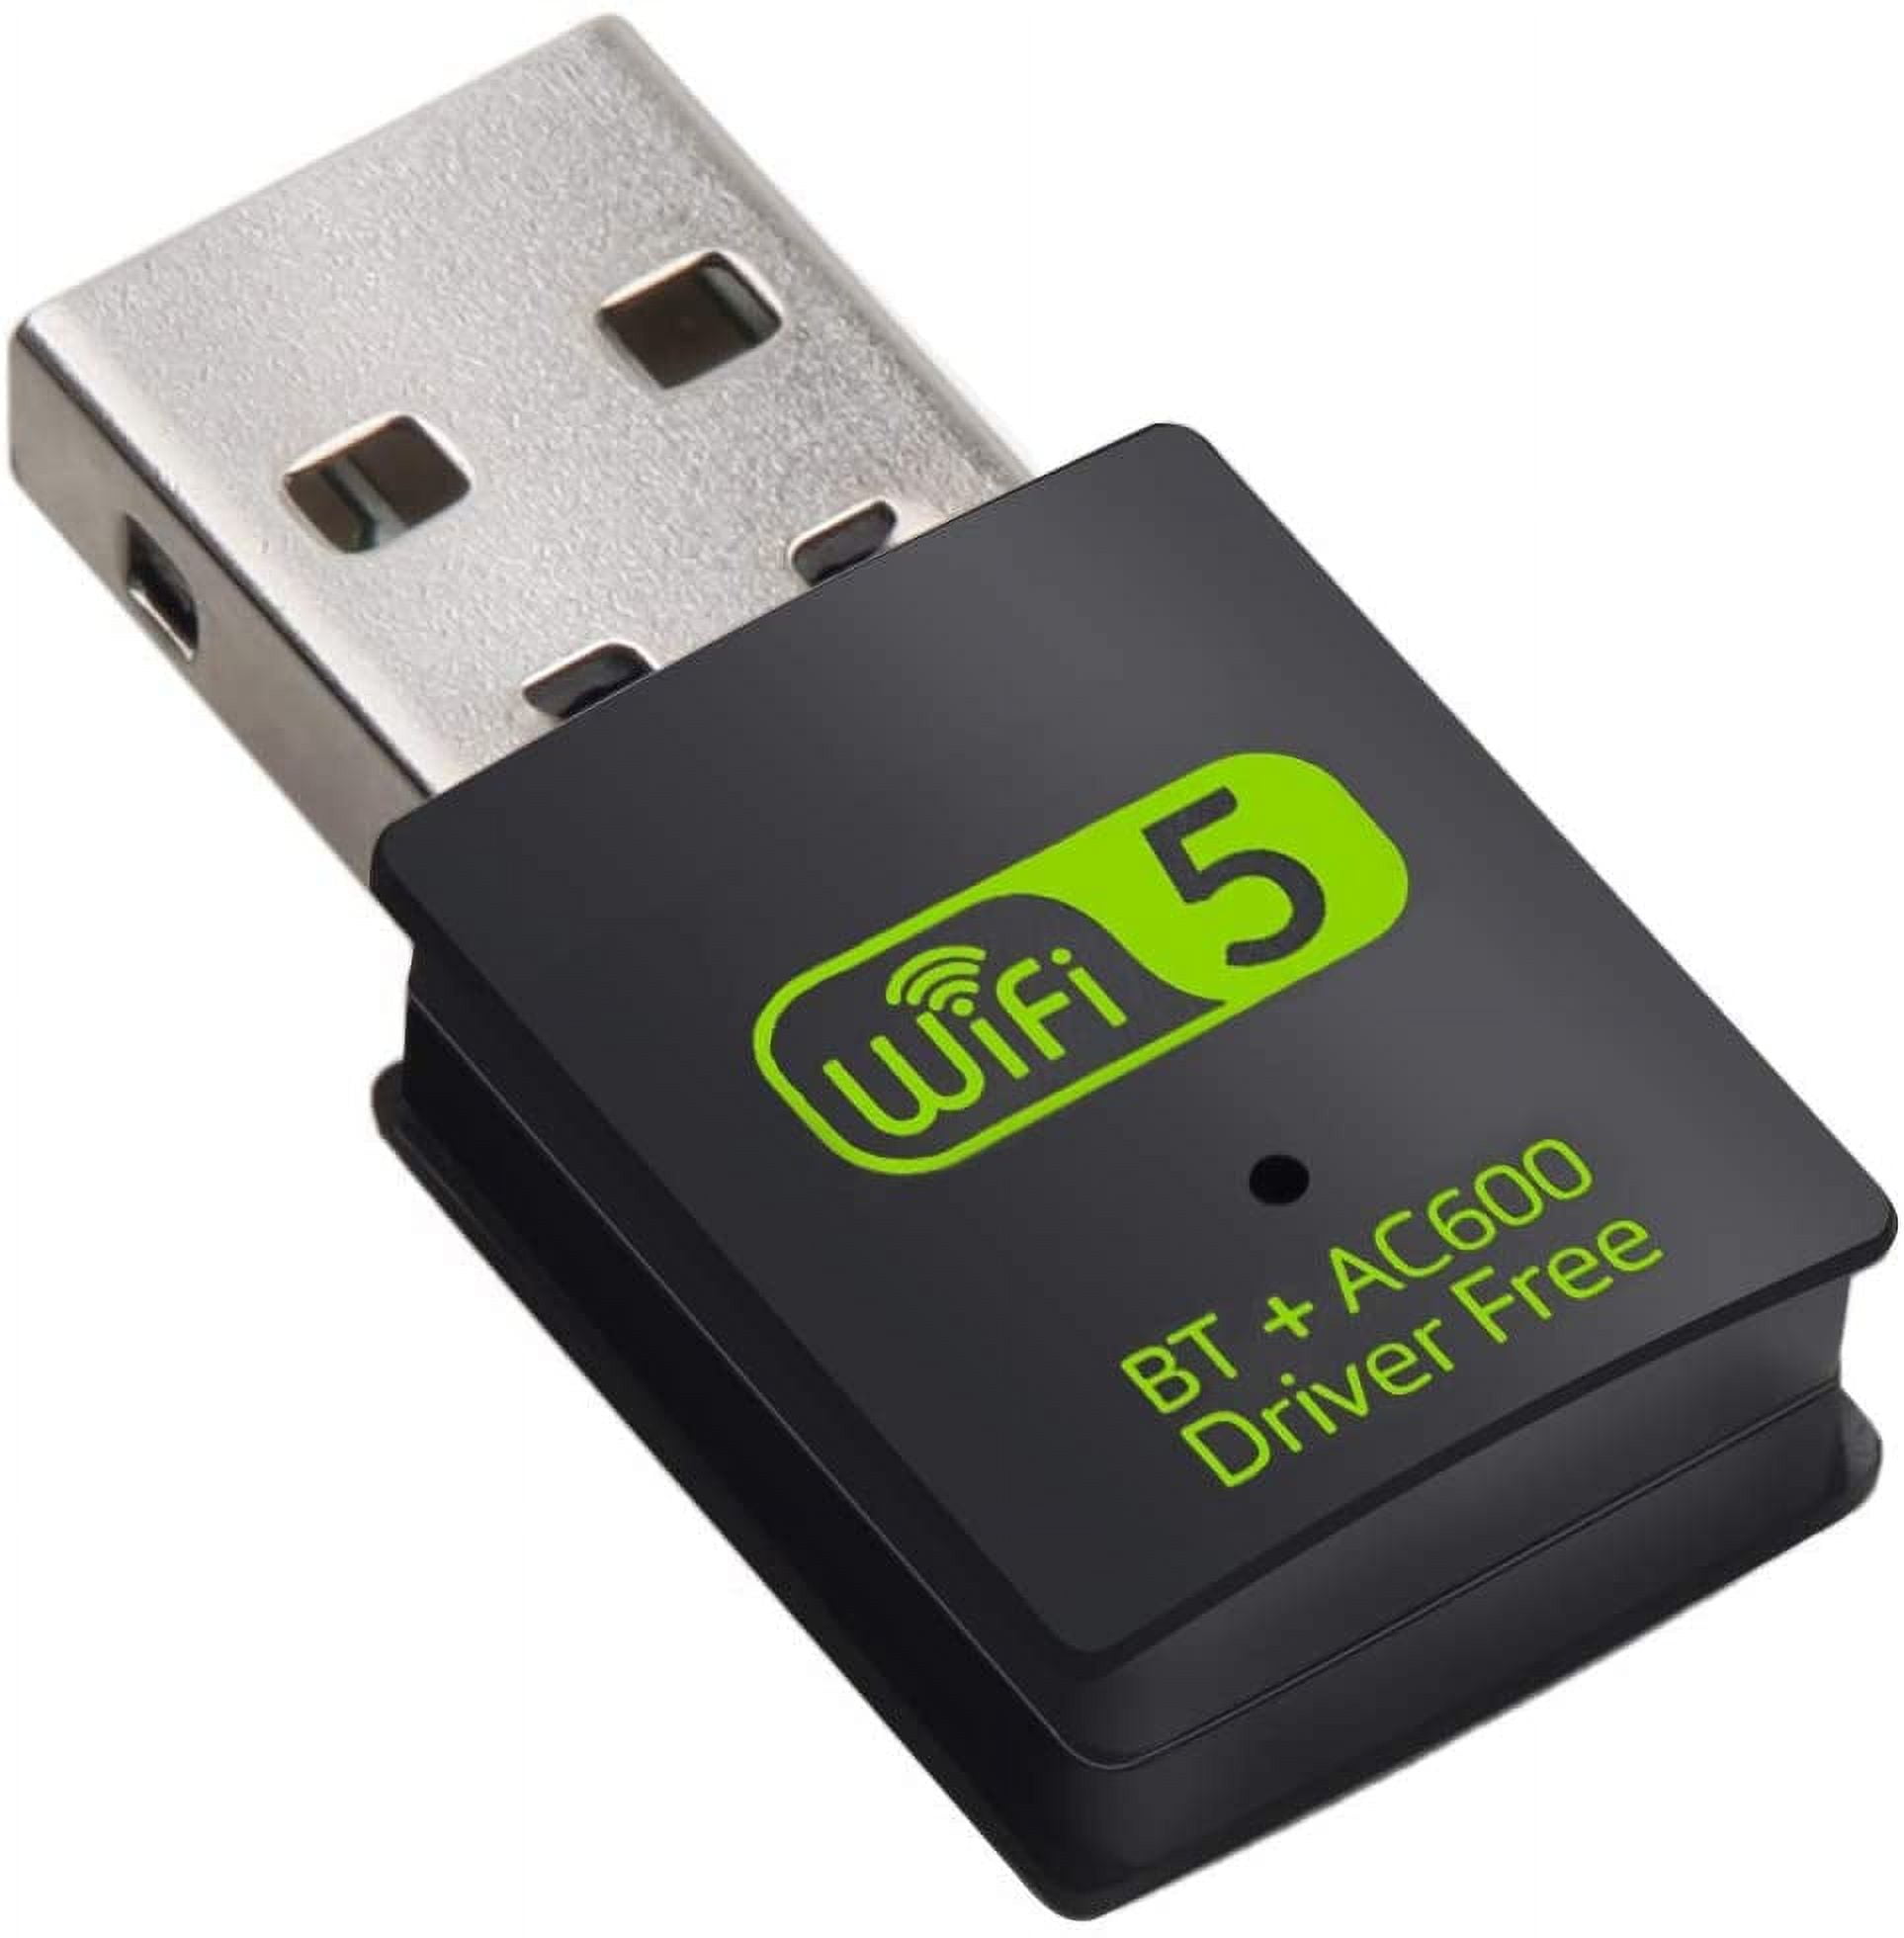 Plugable's USB dongle is yet another cheap way to add Bluetooth